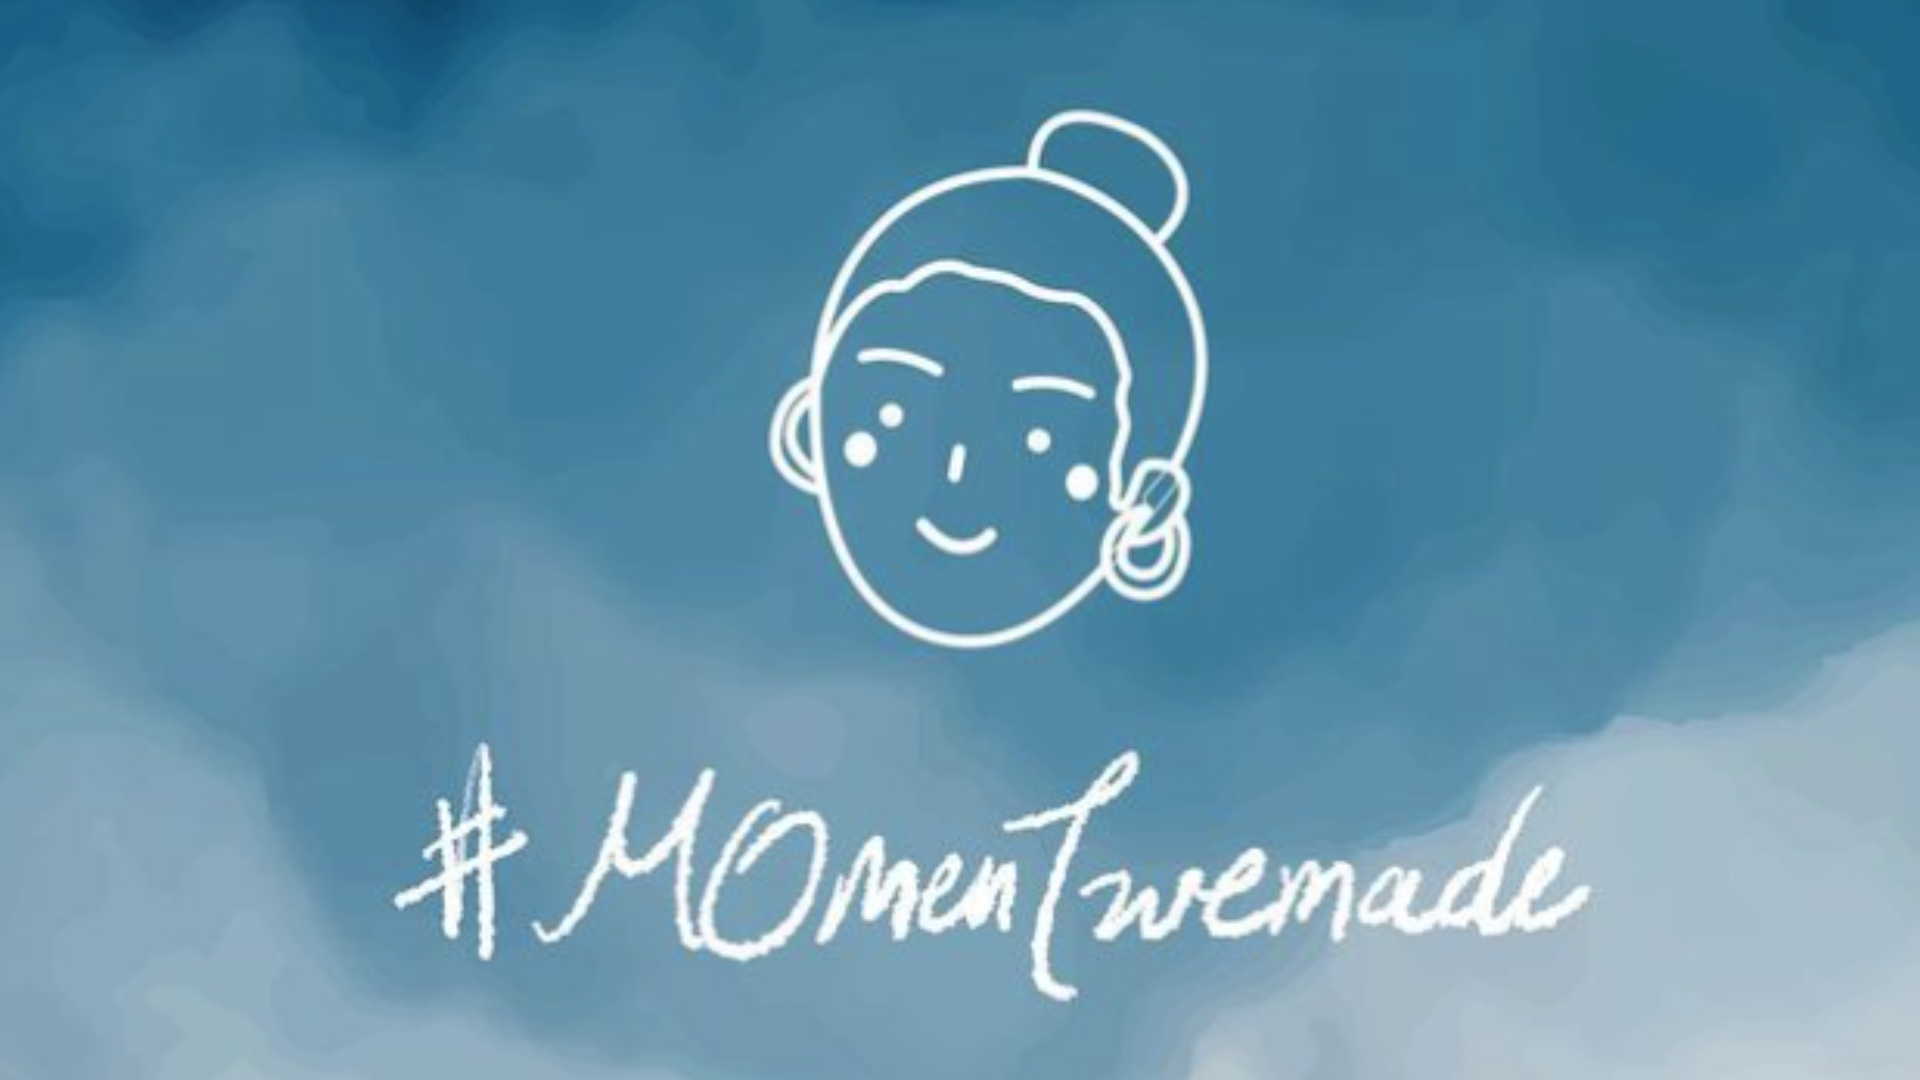 <p>The online campaign had the hashtag #MOmentwemade. There were also billboard displays in various locations in Hong Kong.</p> <p>(Image: fungfung2222 on Instagram)</p>